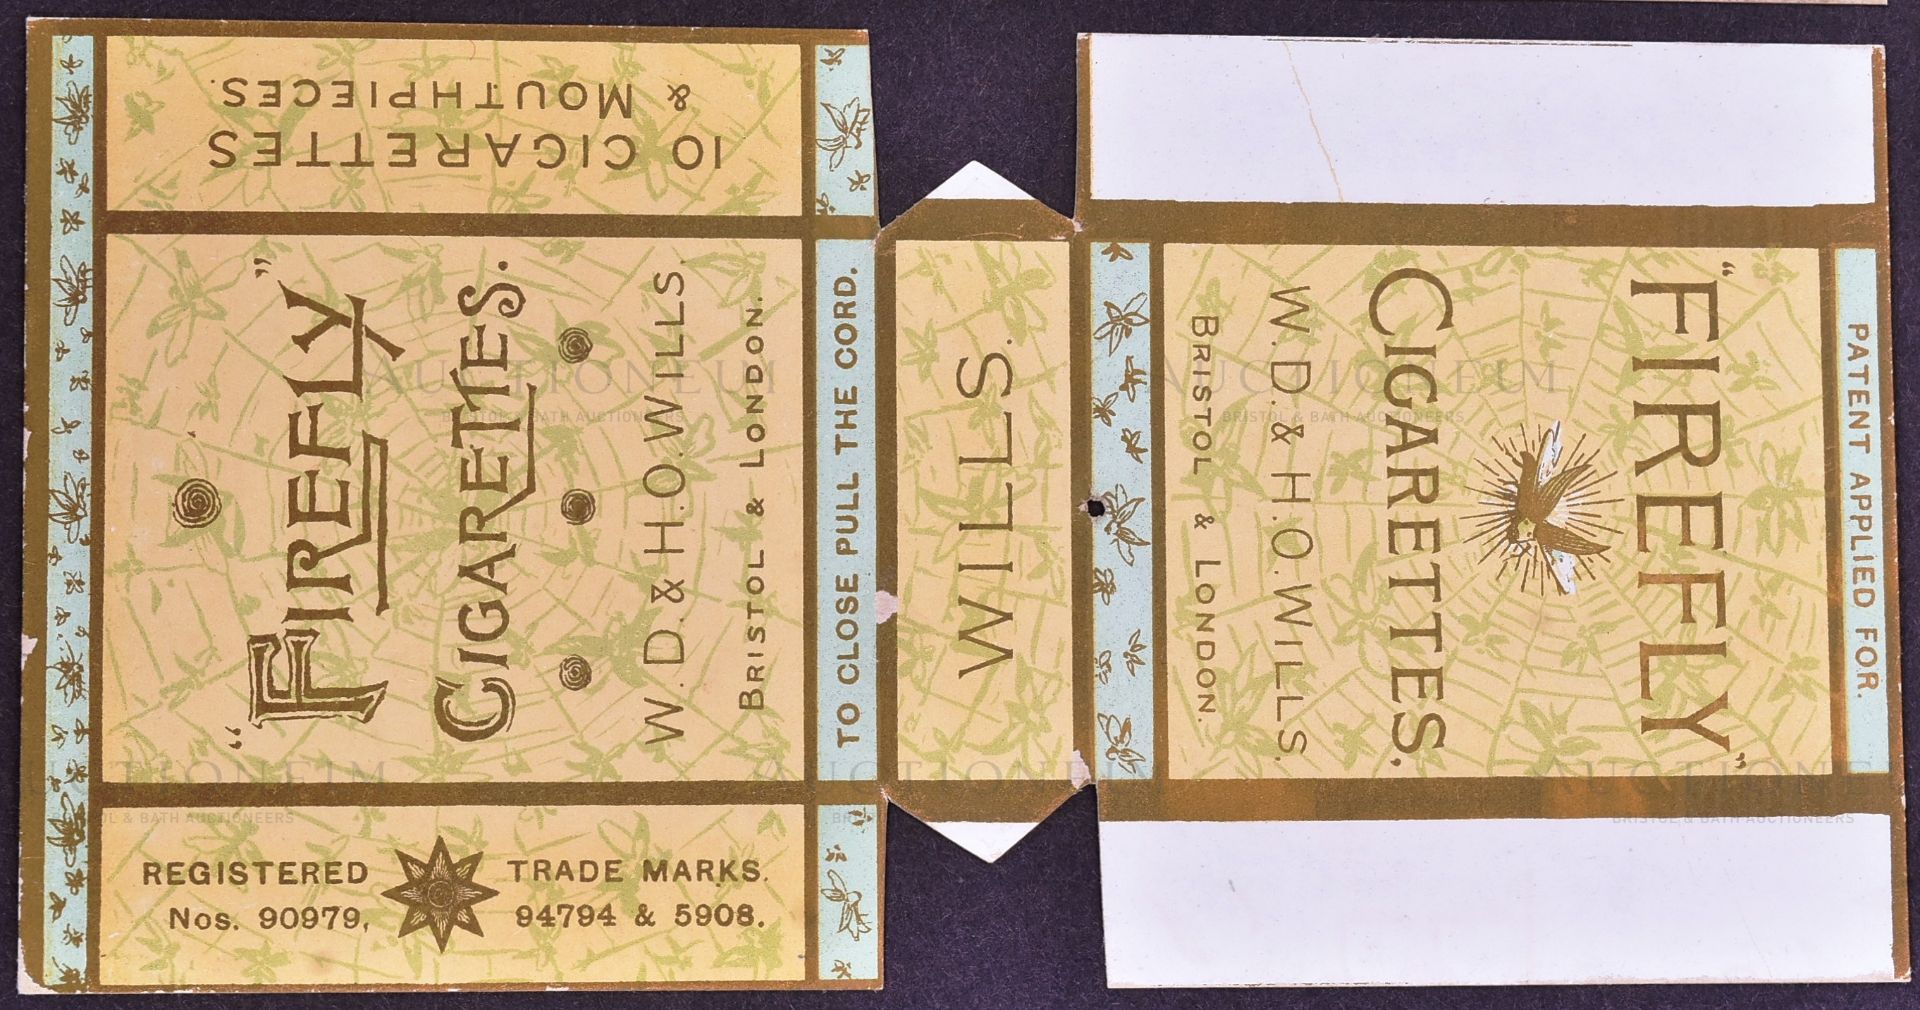 MARDON SON & HALL - CIGARETTE PACKETS - W.D. & H.O. WILLS - Image 3 of 7